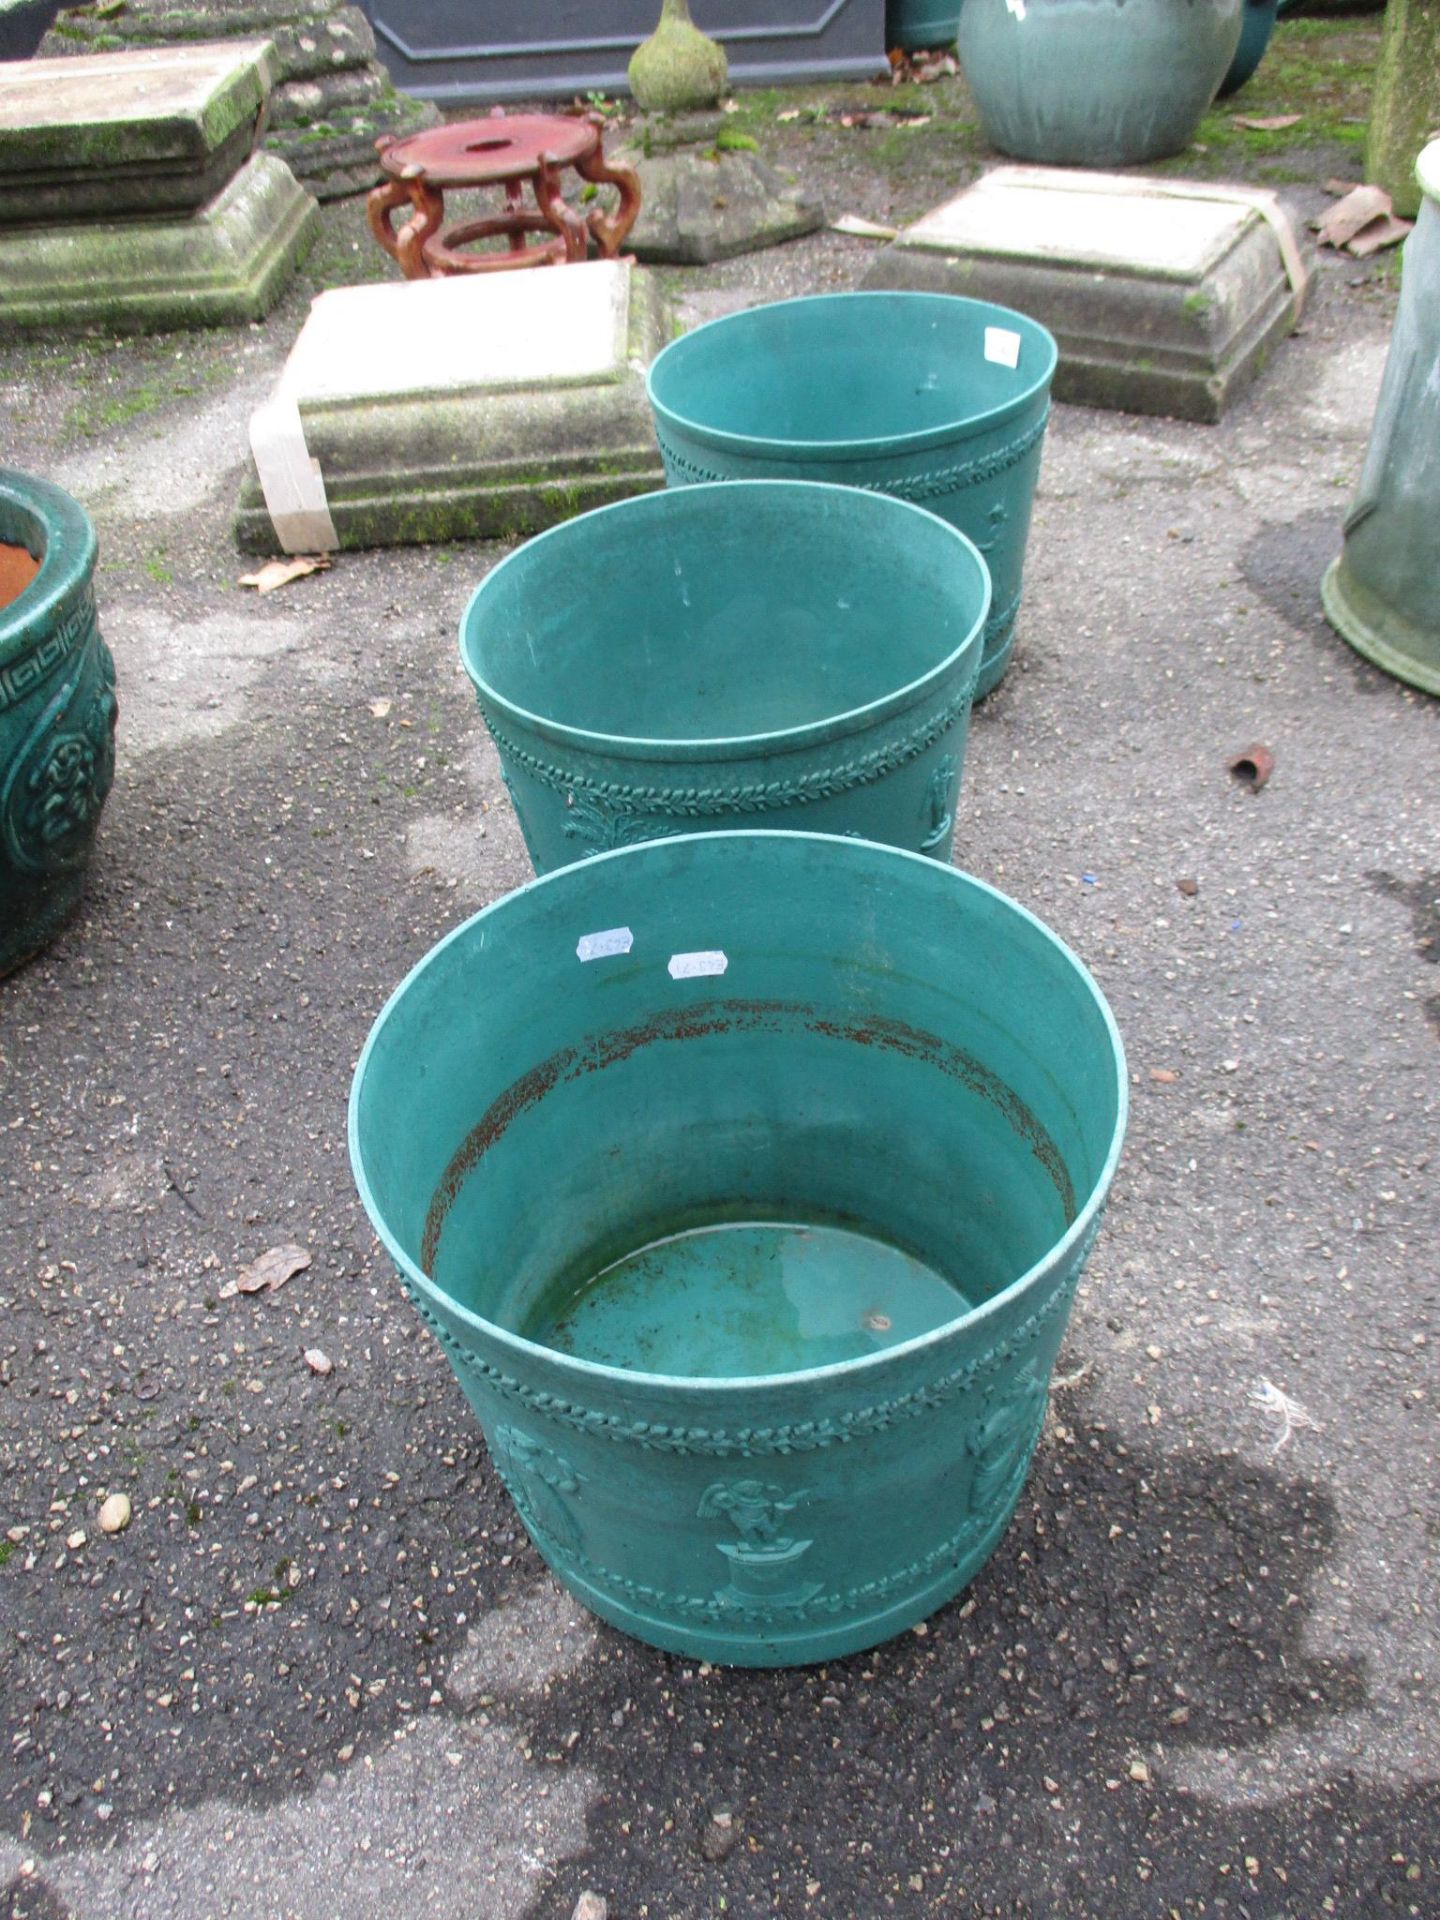 THREE MOULDED PLASTIC PLANTERS, EACH APPROX 27CM